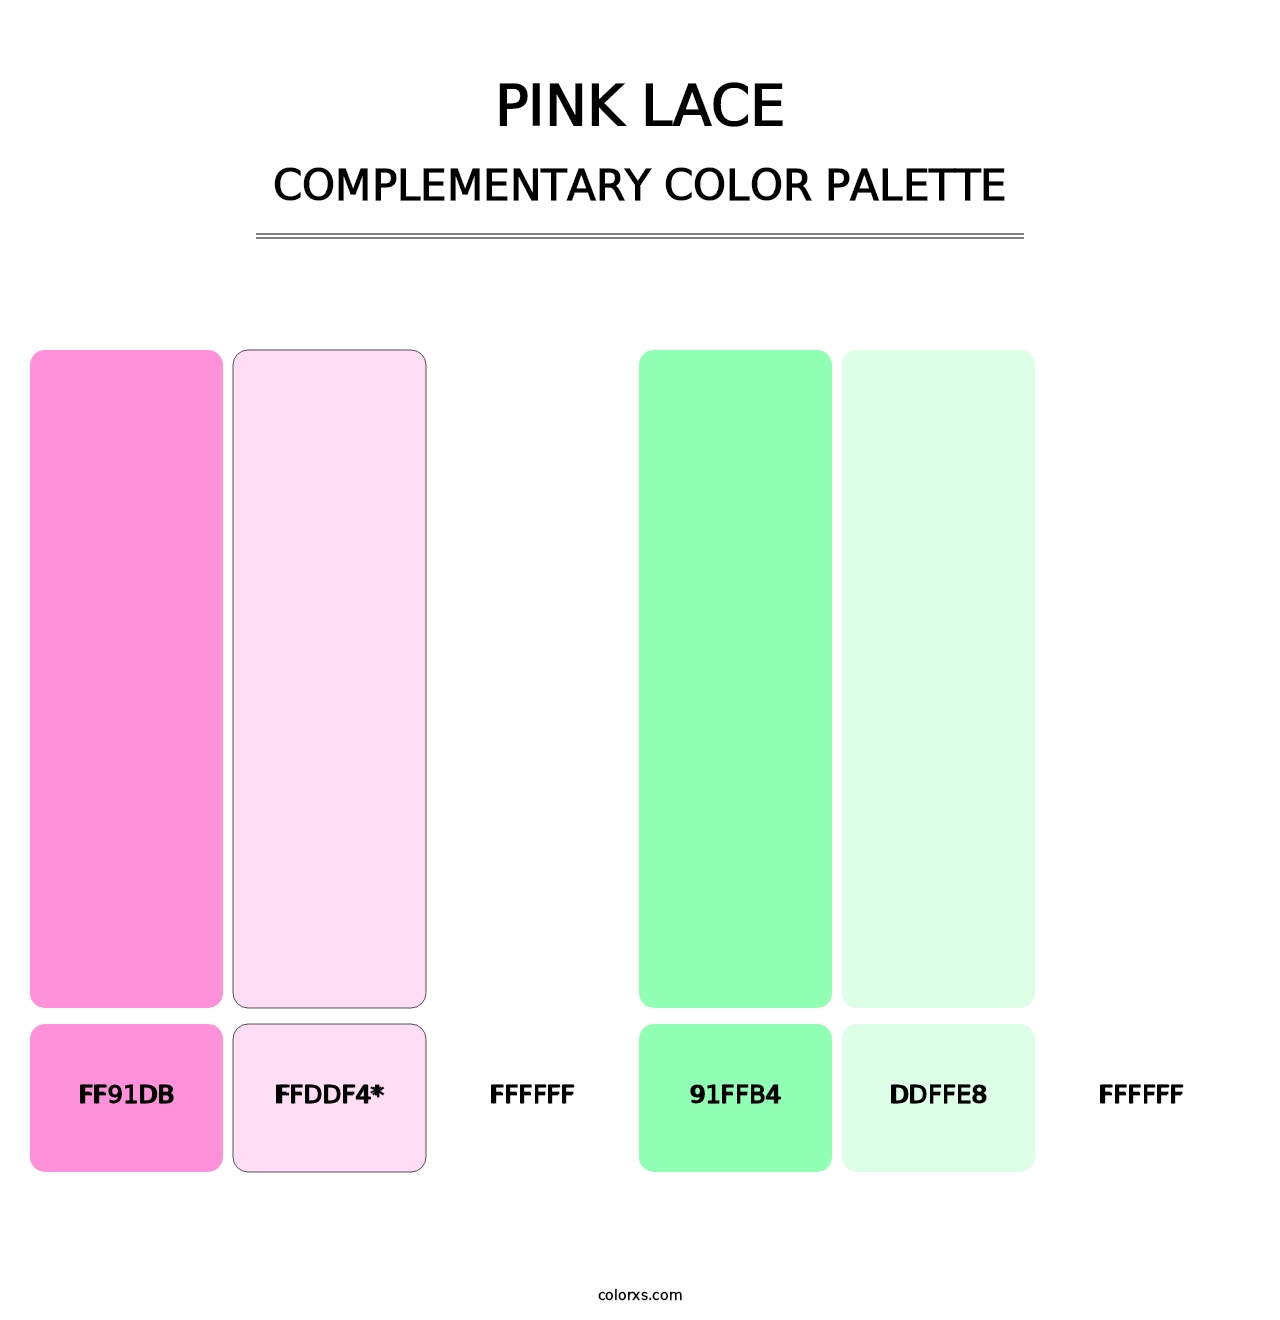 Pink Lace - Complementary Color Palette